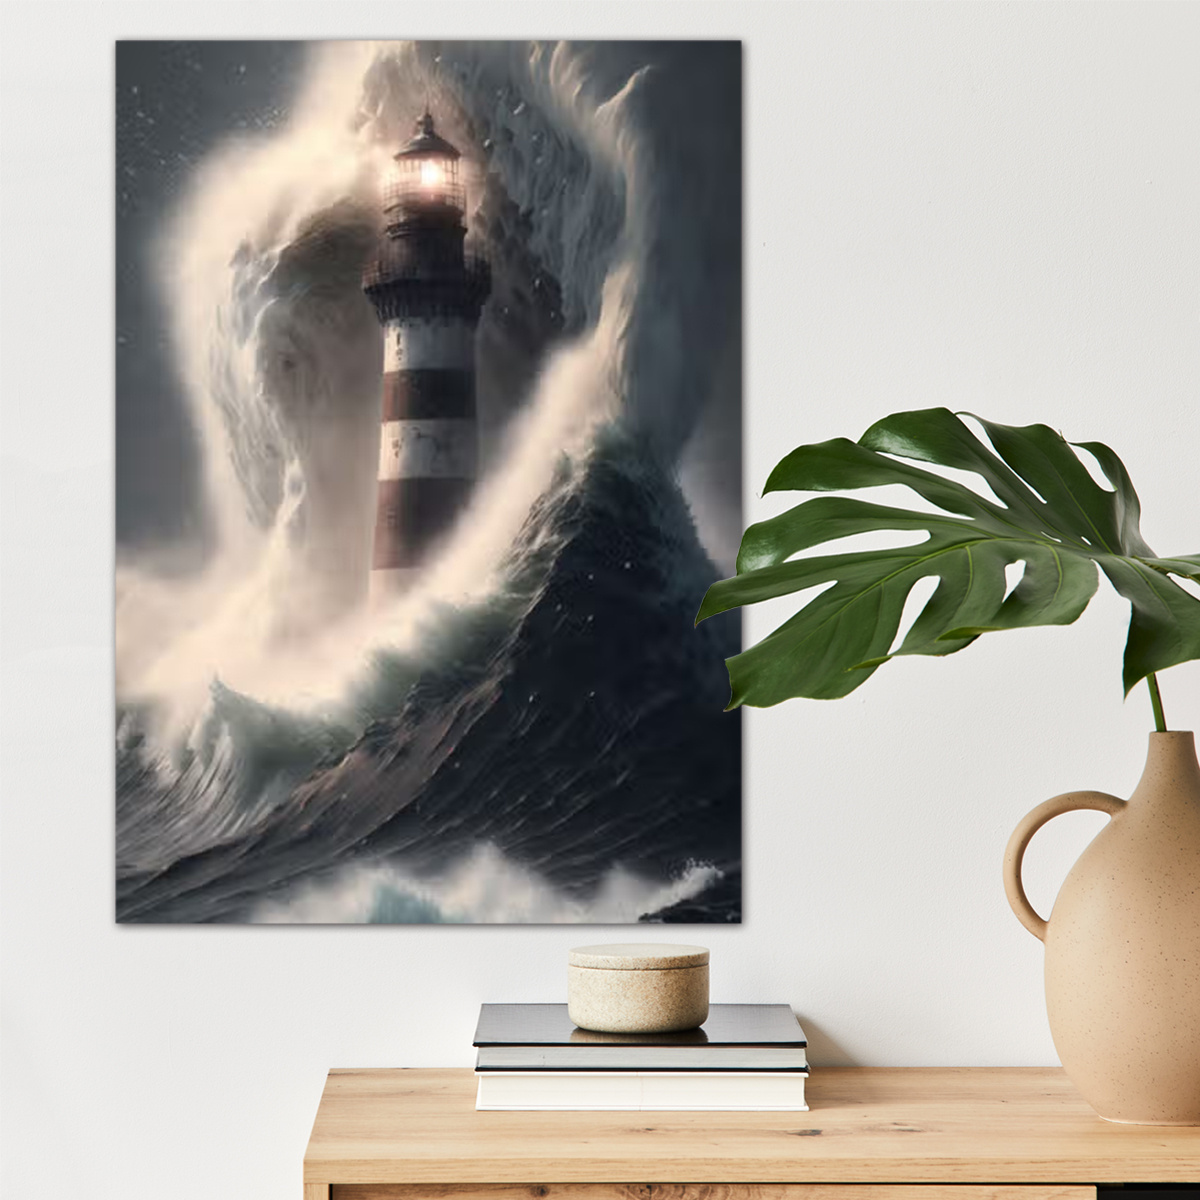 

1pc Lighthouse In Huge Storm Poster Canvas Wall Art For Home Decor, Sea Wave Poster Wall Decor High Quality Canvas Prints For Living Room Bedroom Kitchen Office Cafe Decor, Perfect Gift And Decoration